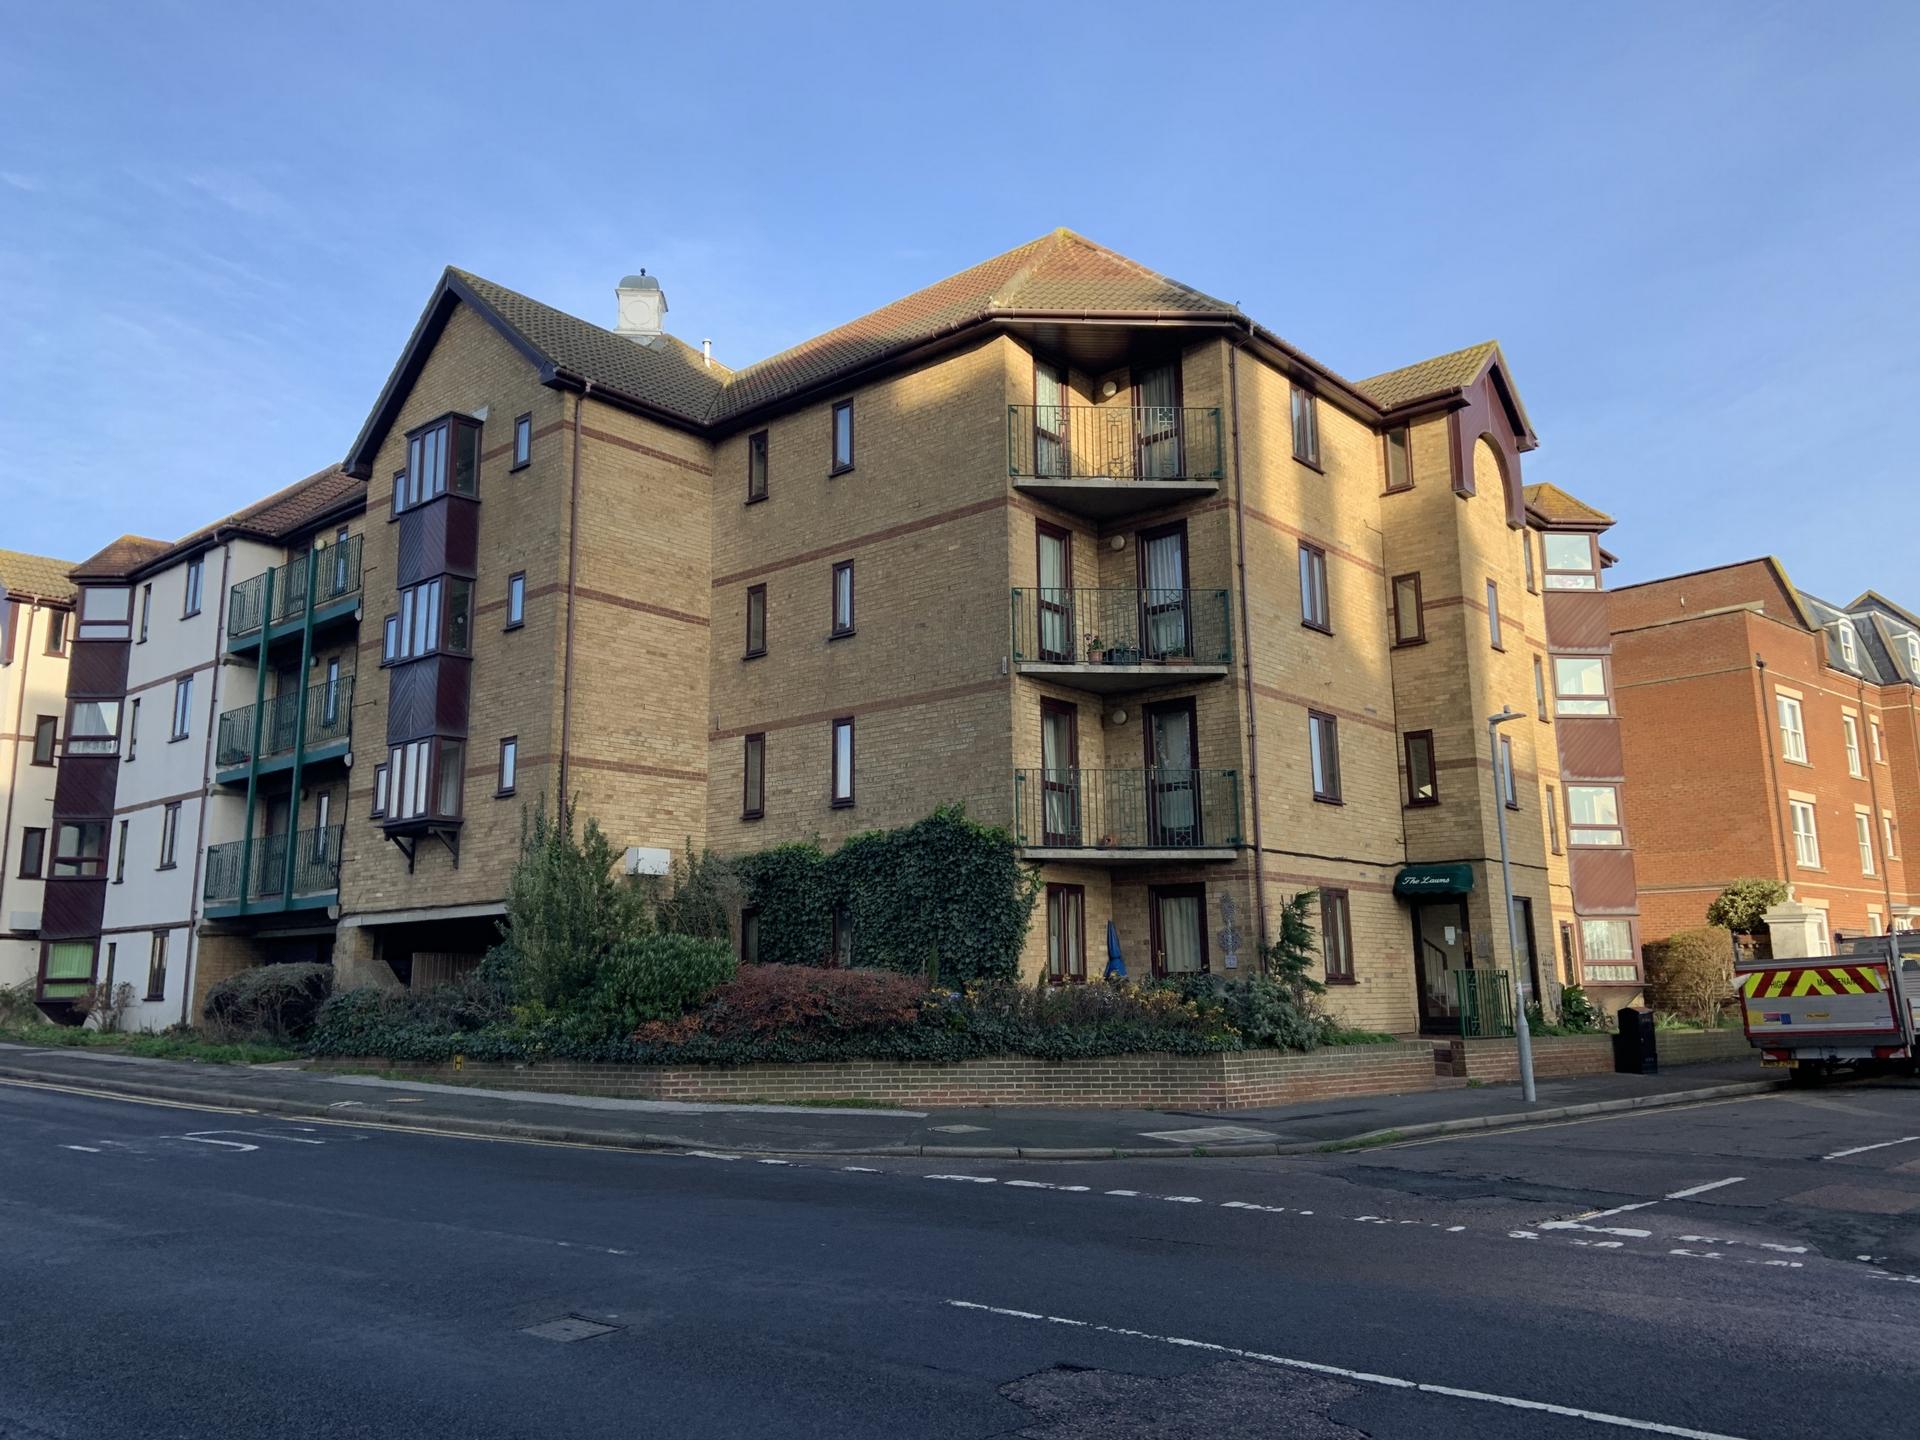 Henderson Setterfield is delighted to offer this 2 bed fully refurbished 2nd floor flat which is situated close to Ramsgate Harbour, local shops, bars and restaurants.  The property comprises 1 double and 1 single bedroom, fitted kitchen including hob, oven and extractor fan. 